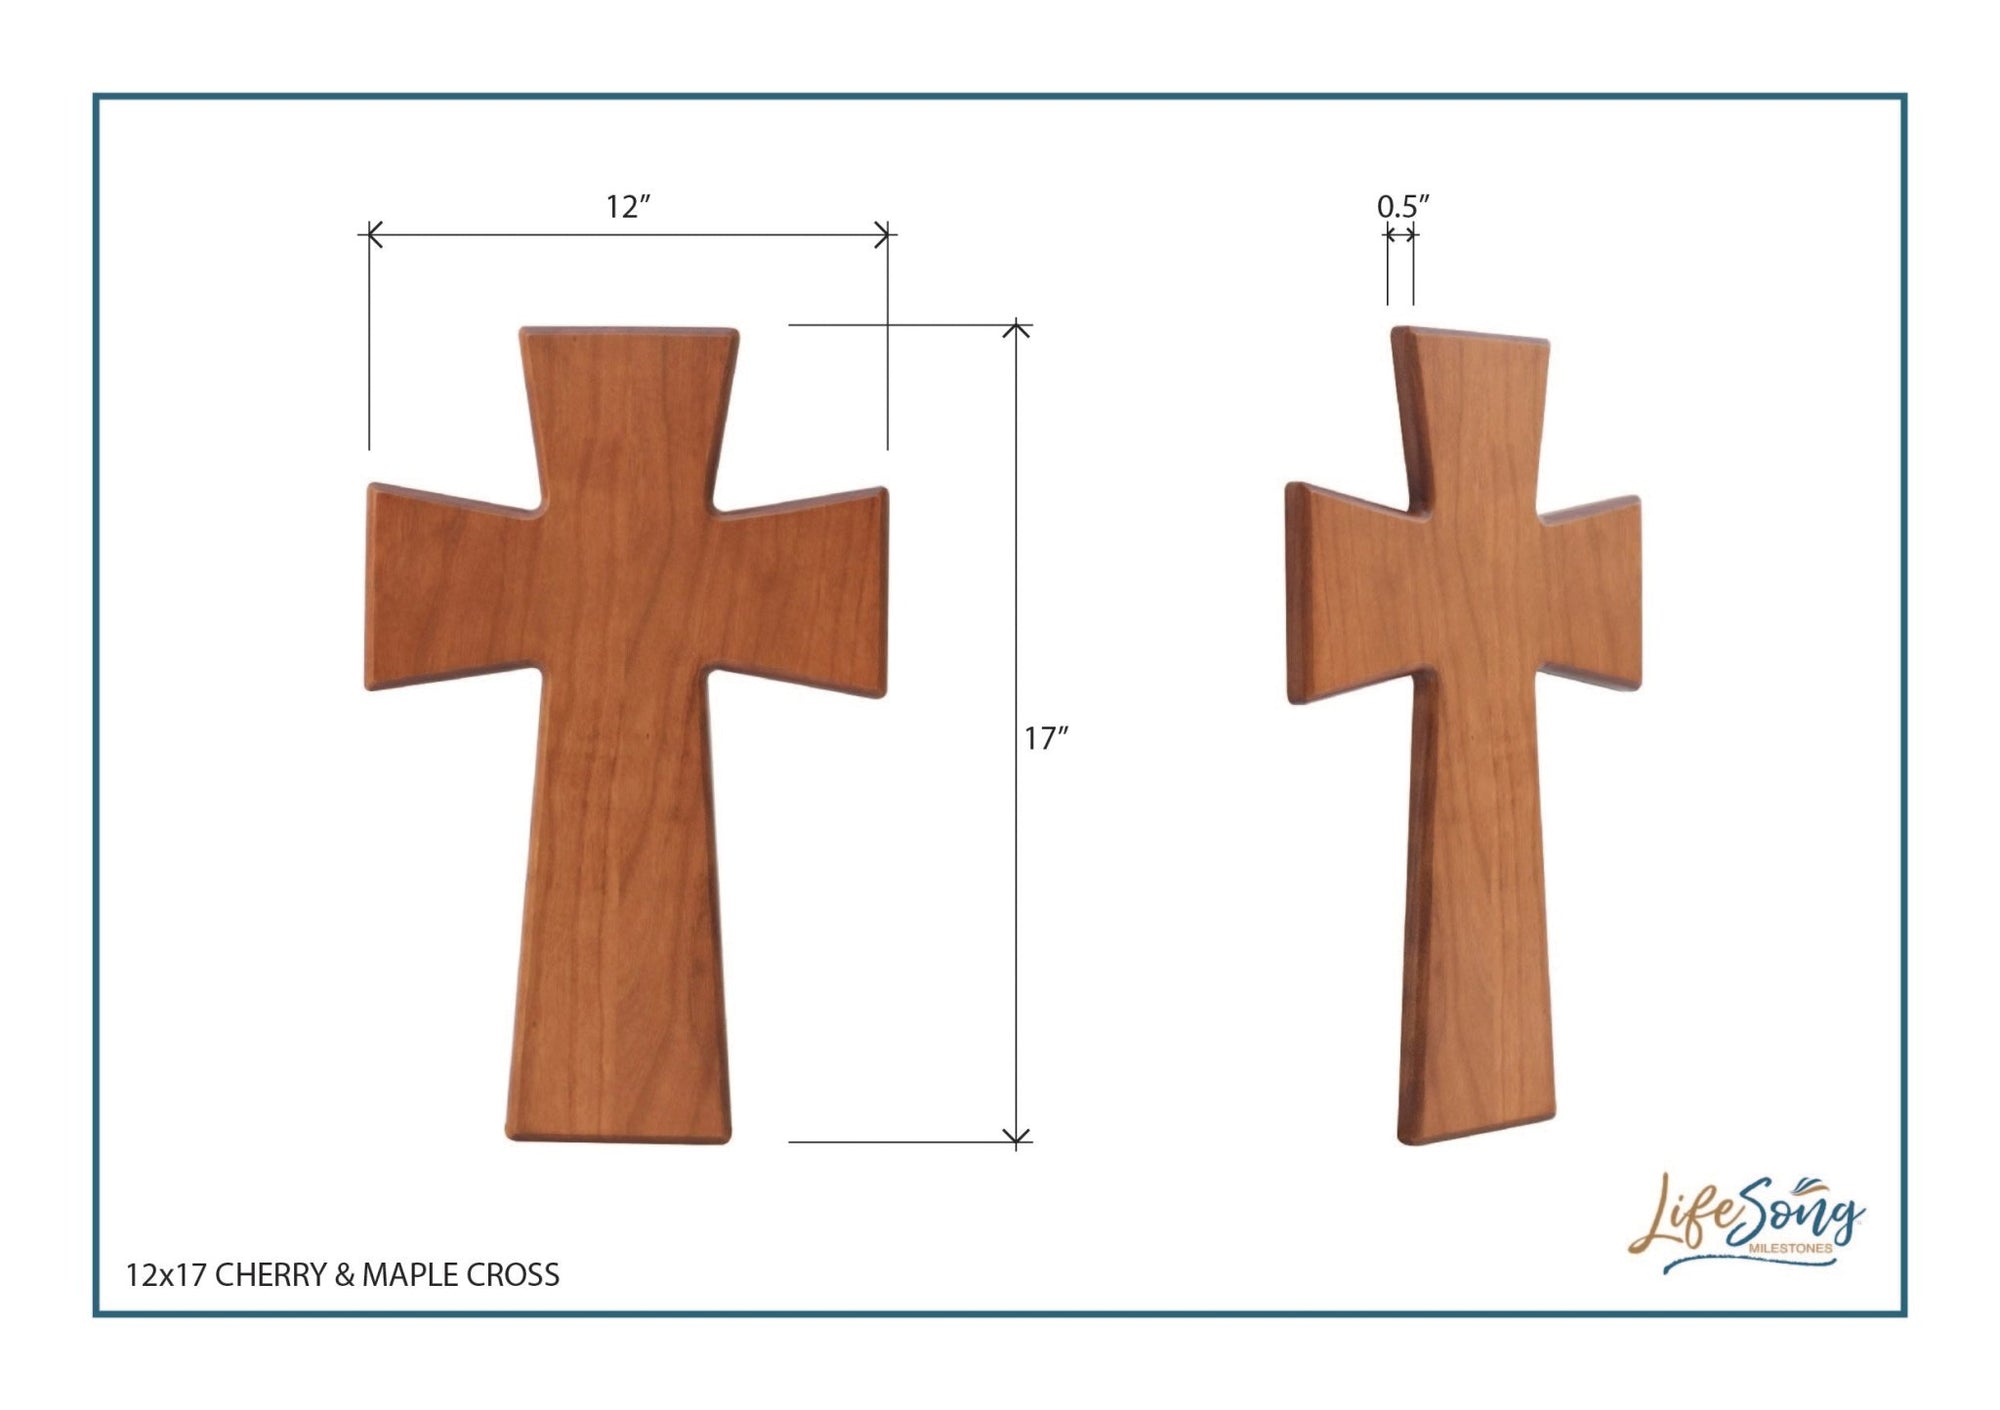 Lifesong Milestones Personalized 25th wedding wall cross – A symbol of enduring love and a perfect anniversary gift for the couple.